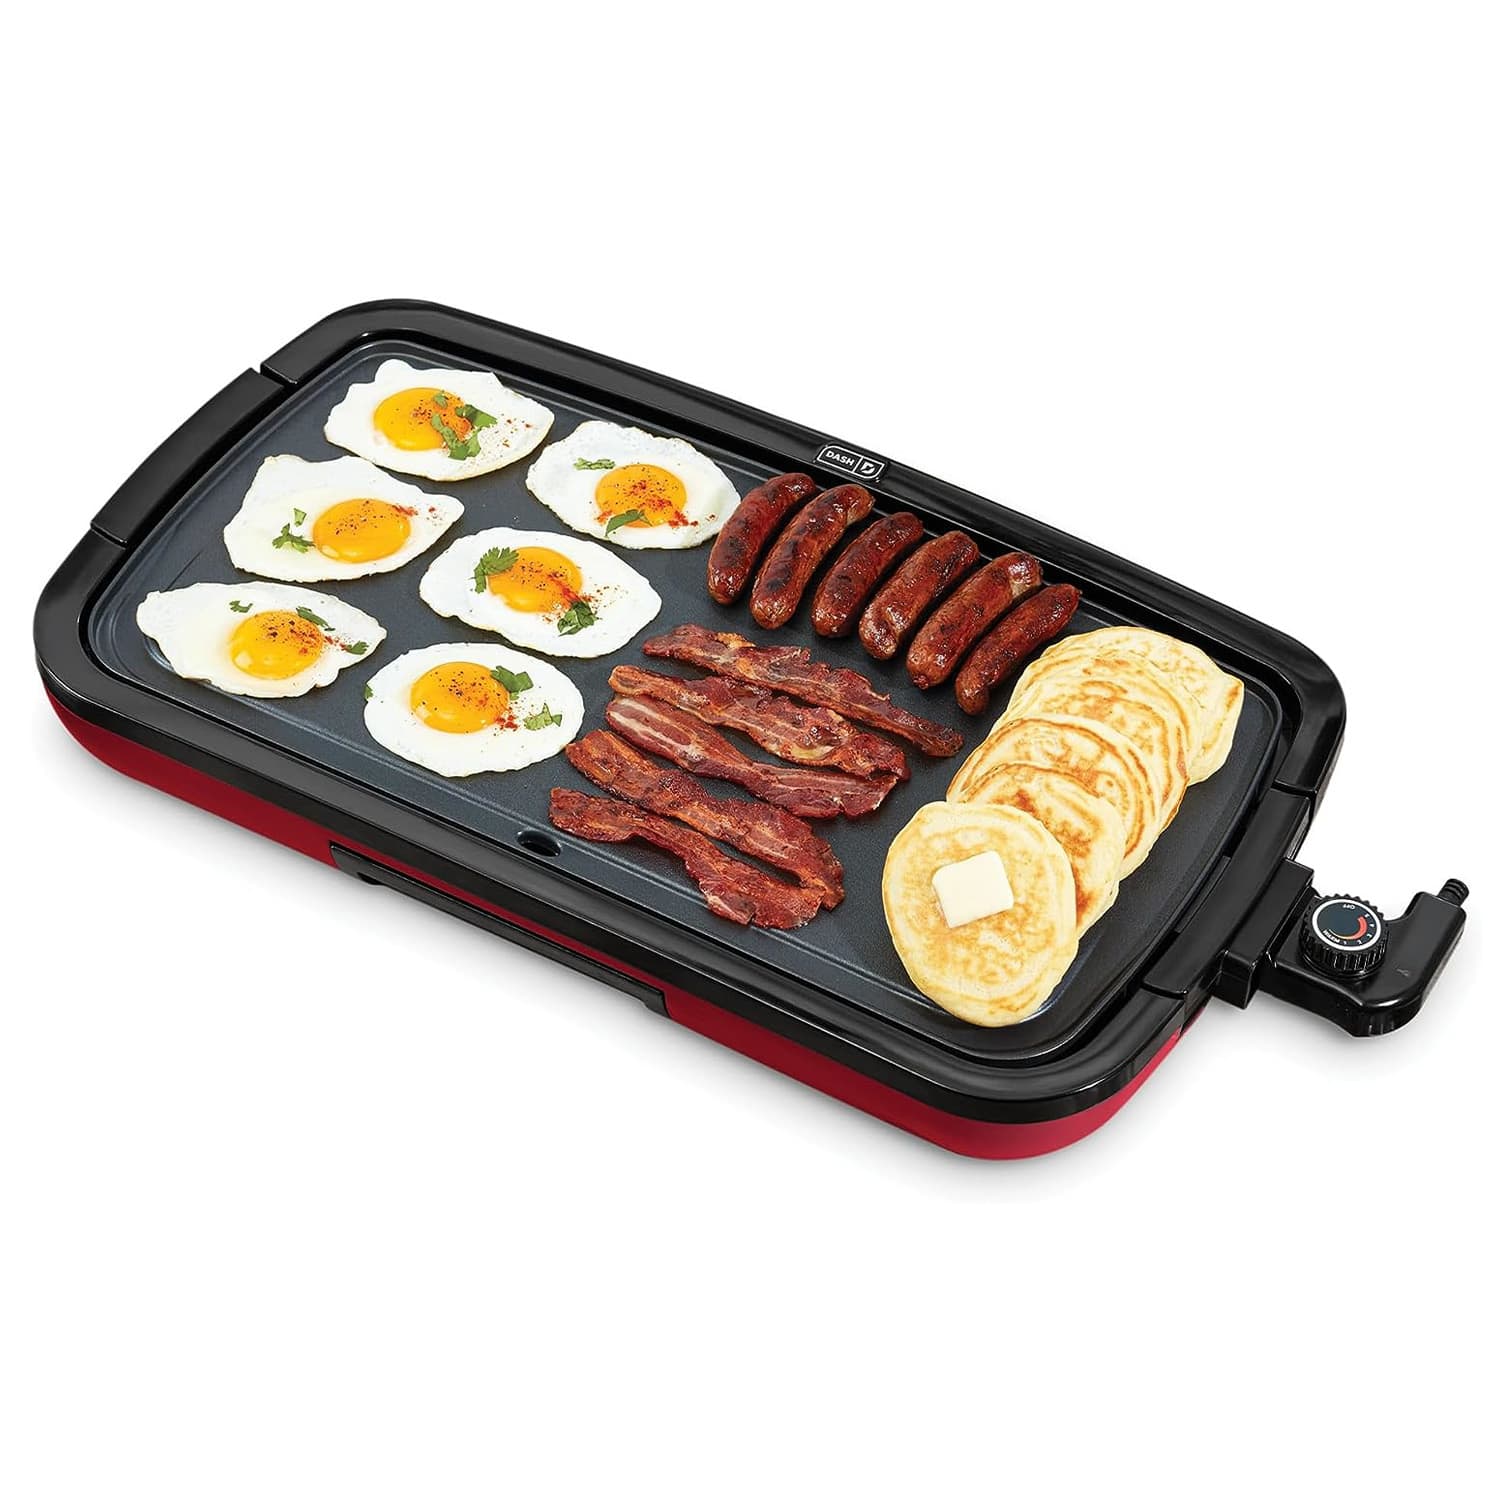 Dash 8 Electric Griddle Recipe in 2023  Griddle recipes, Grilling  recipes, Recipes